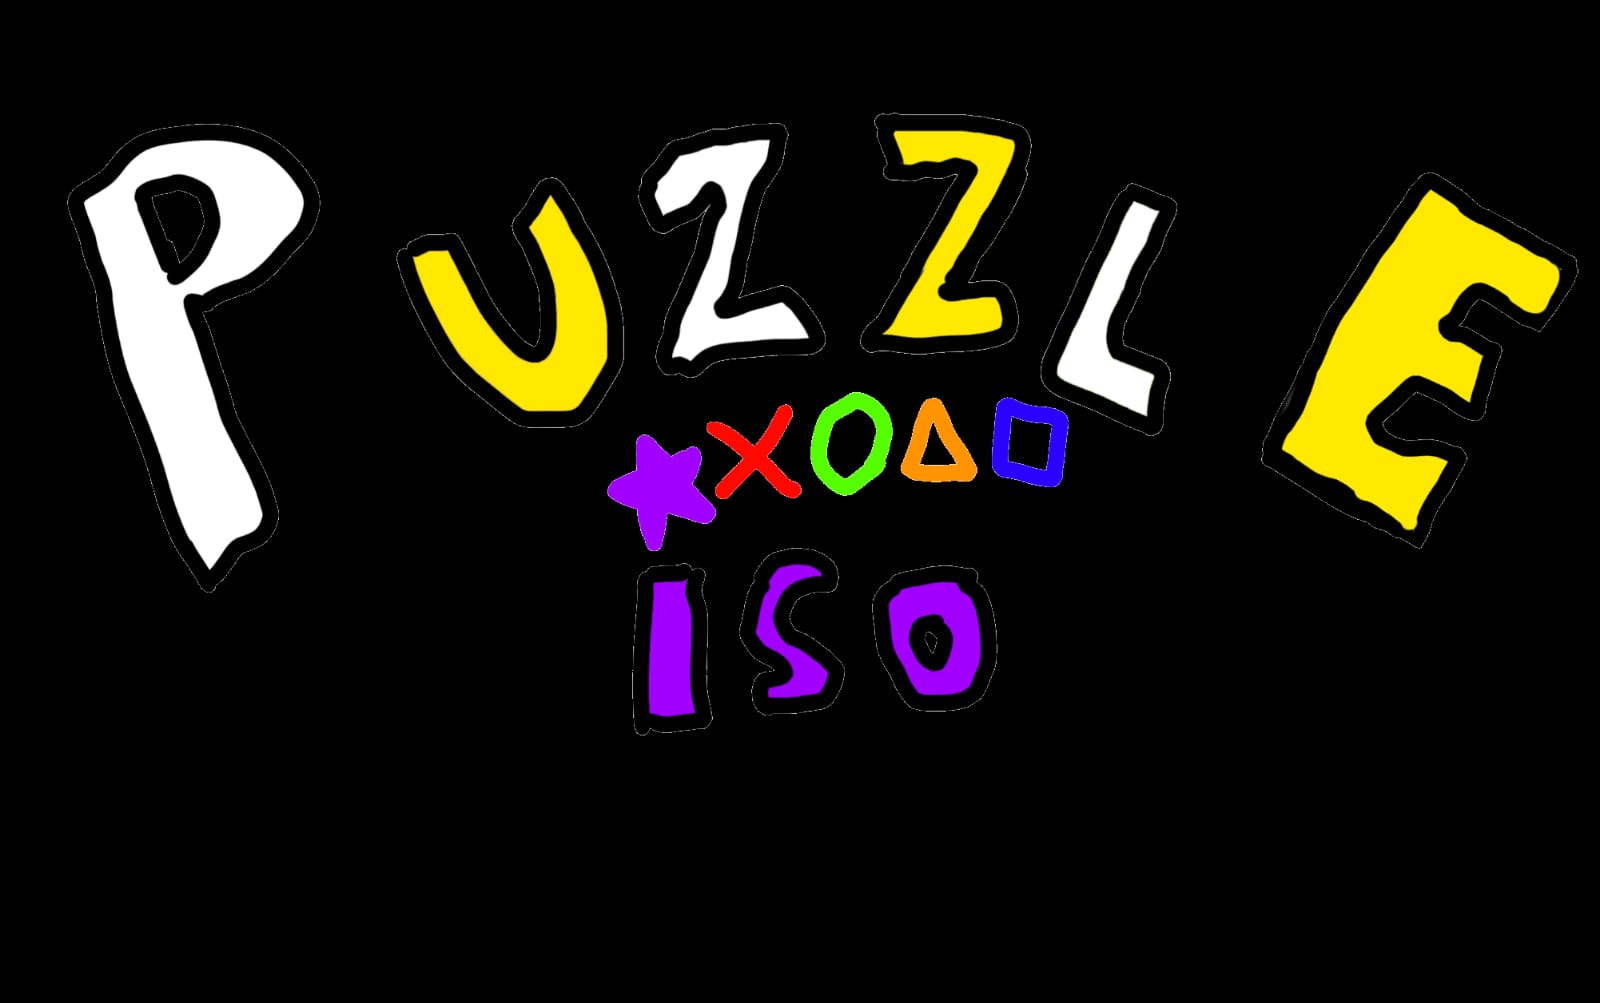 Puzzle-iso